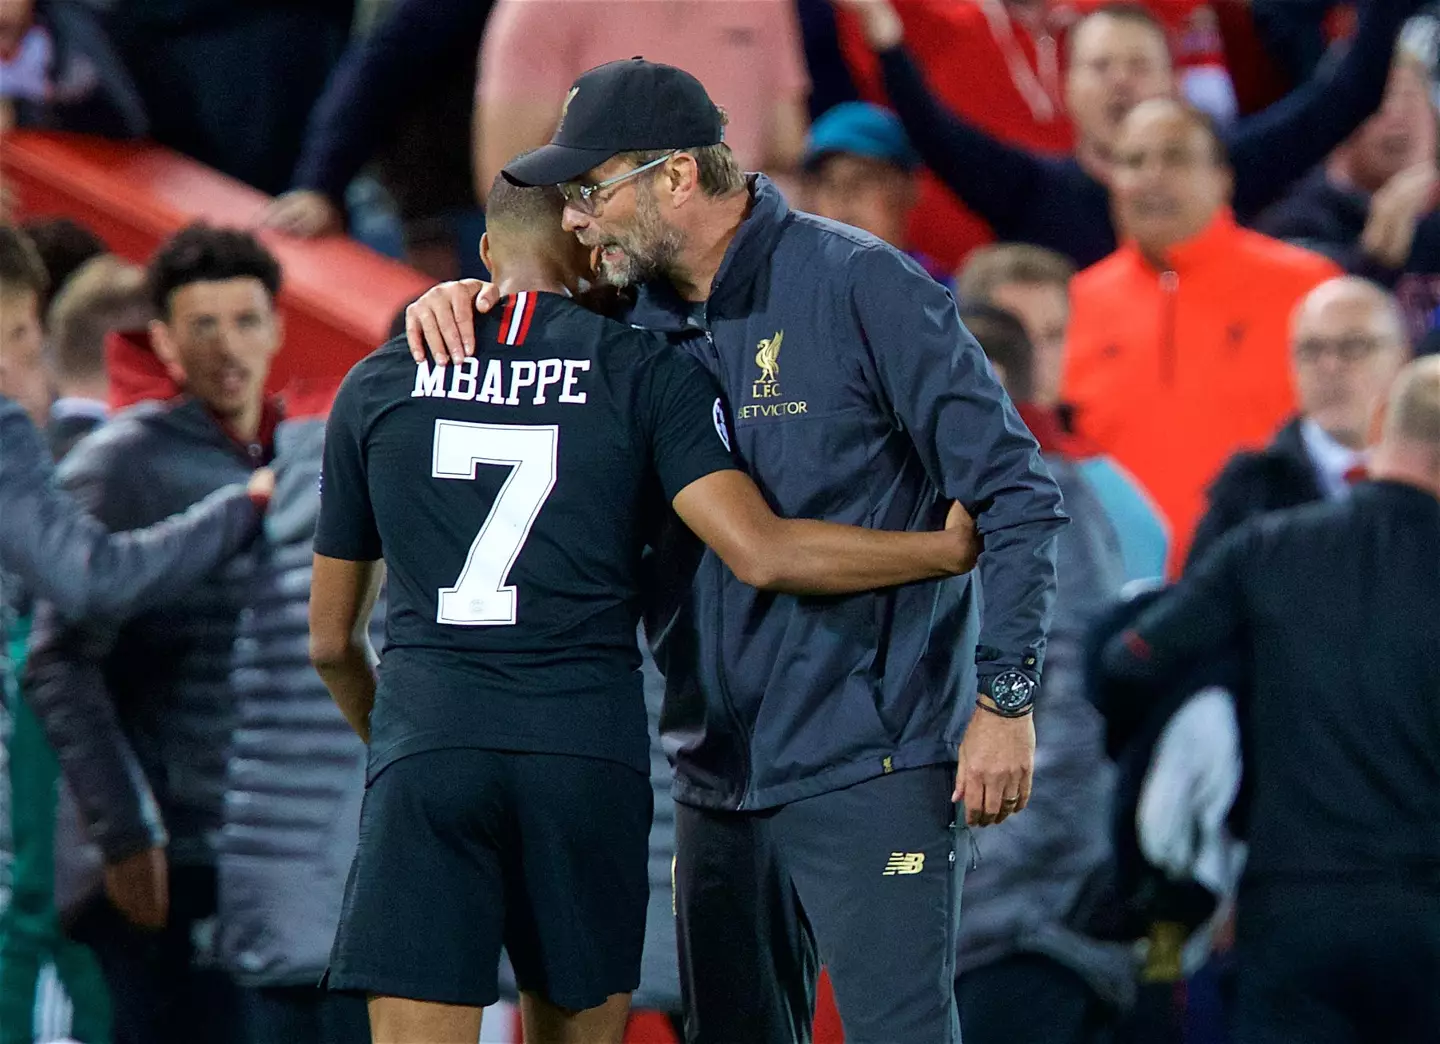 Maybe Klopp also had a quick word with Mbappe in 2018. Image: PA Images